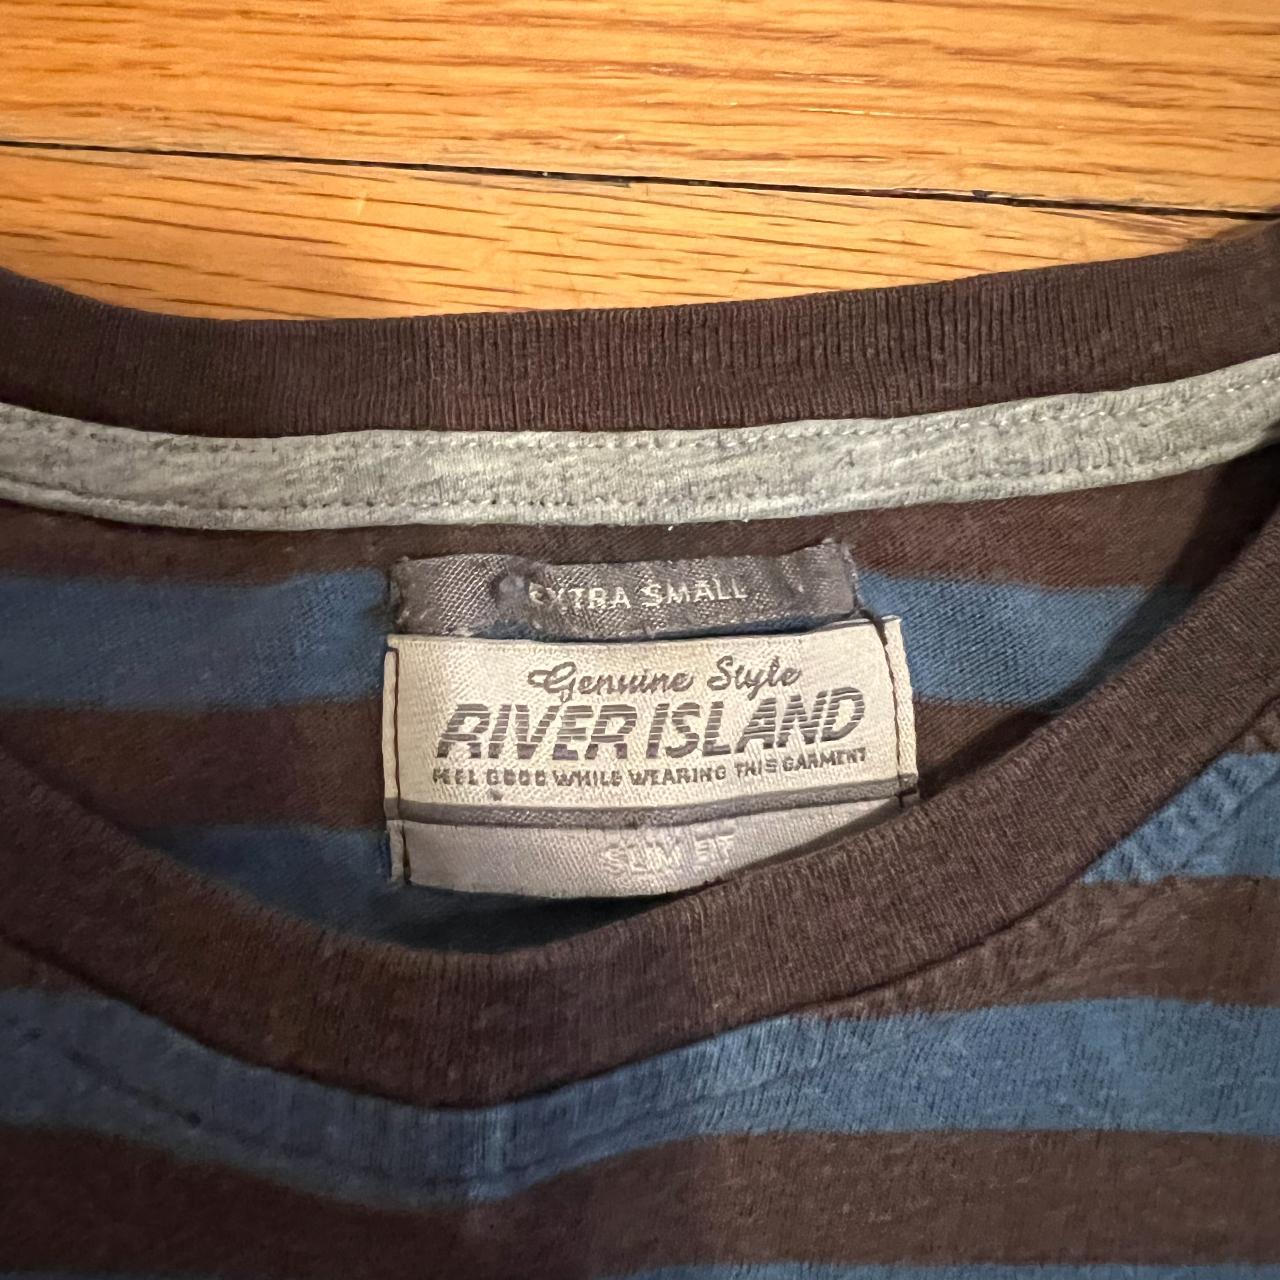 River Island Women's Brown and Navy Shirt (4)